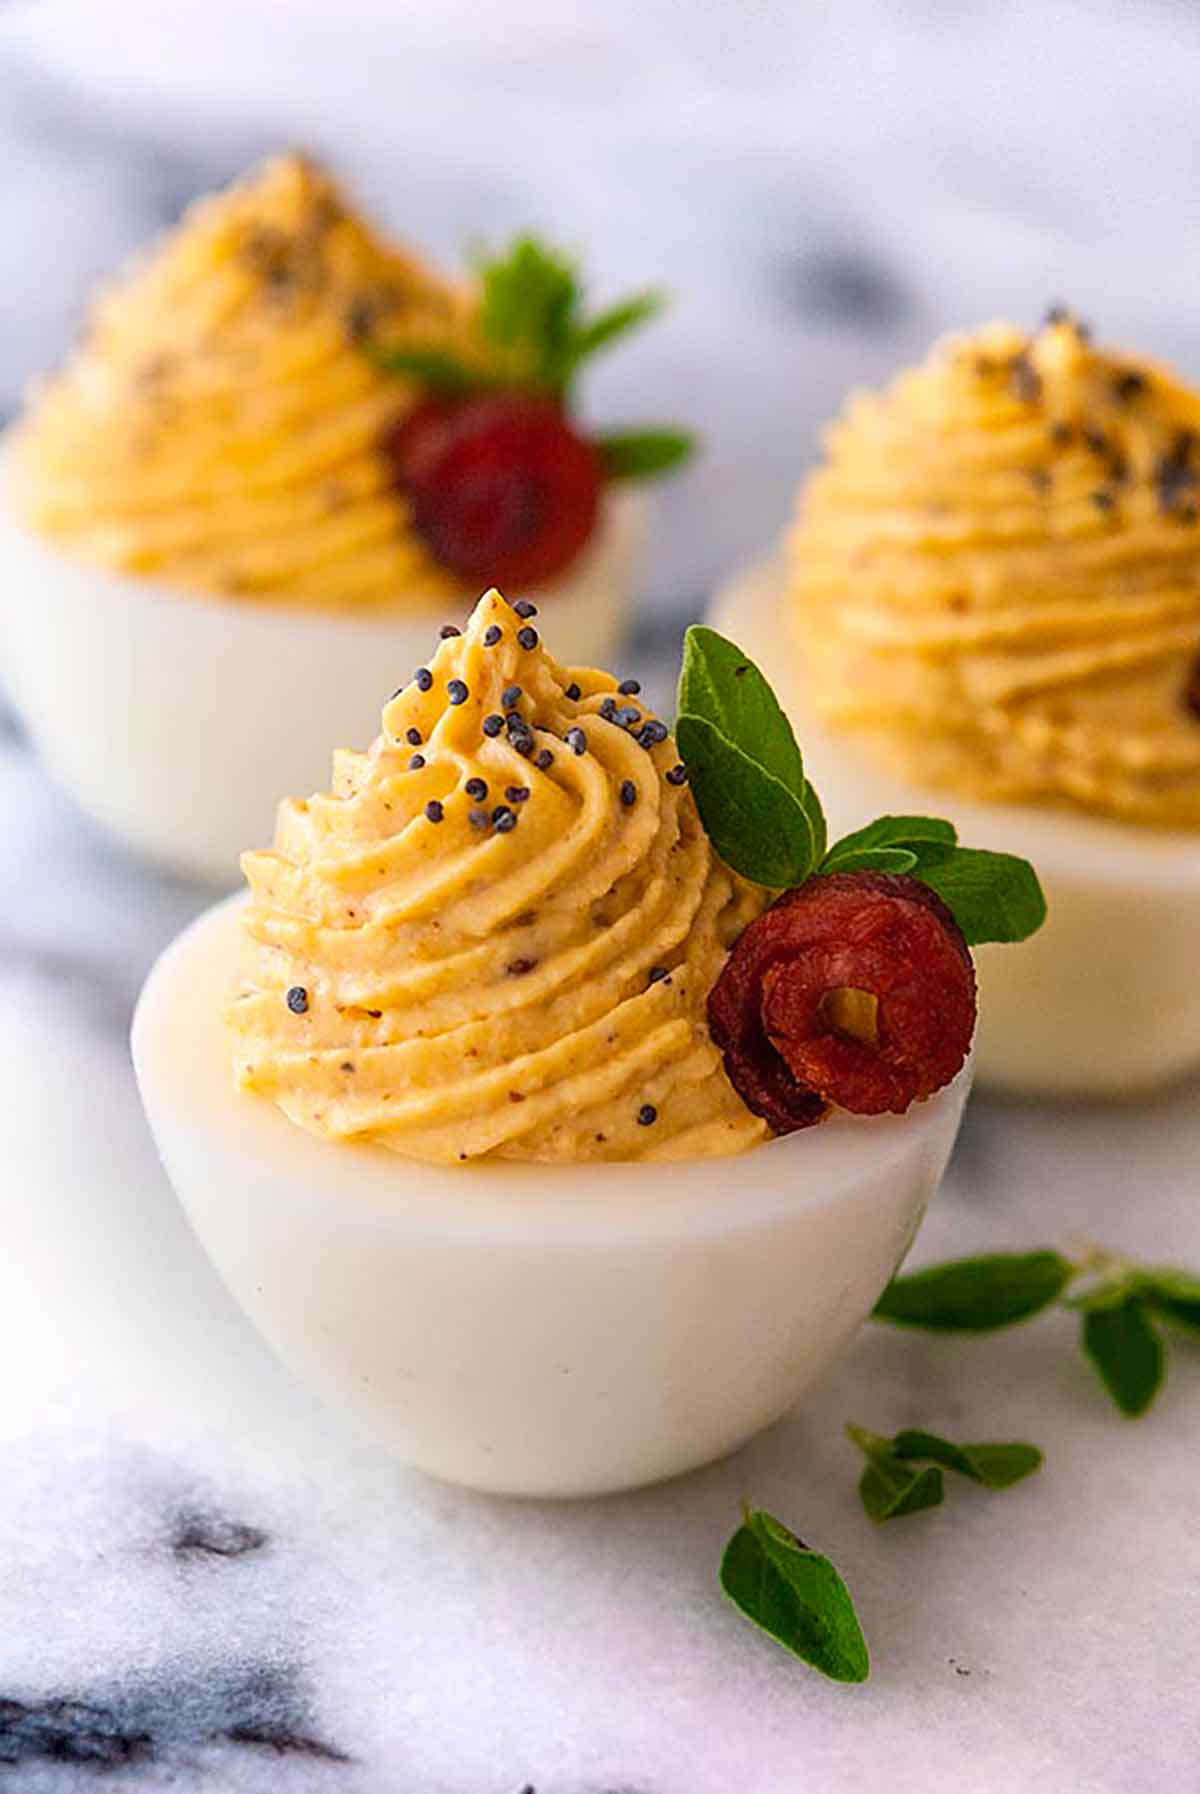 3 deviled eggs garnished with tiny bacon roses, oregano leaves and a sprinkle of poppy seeds.